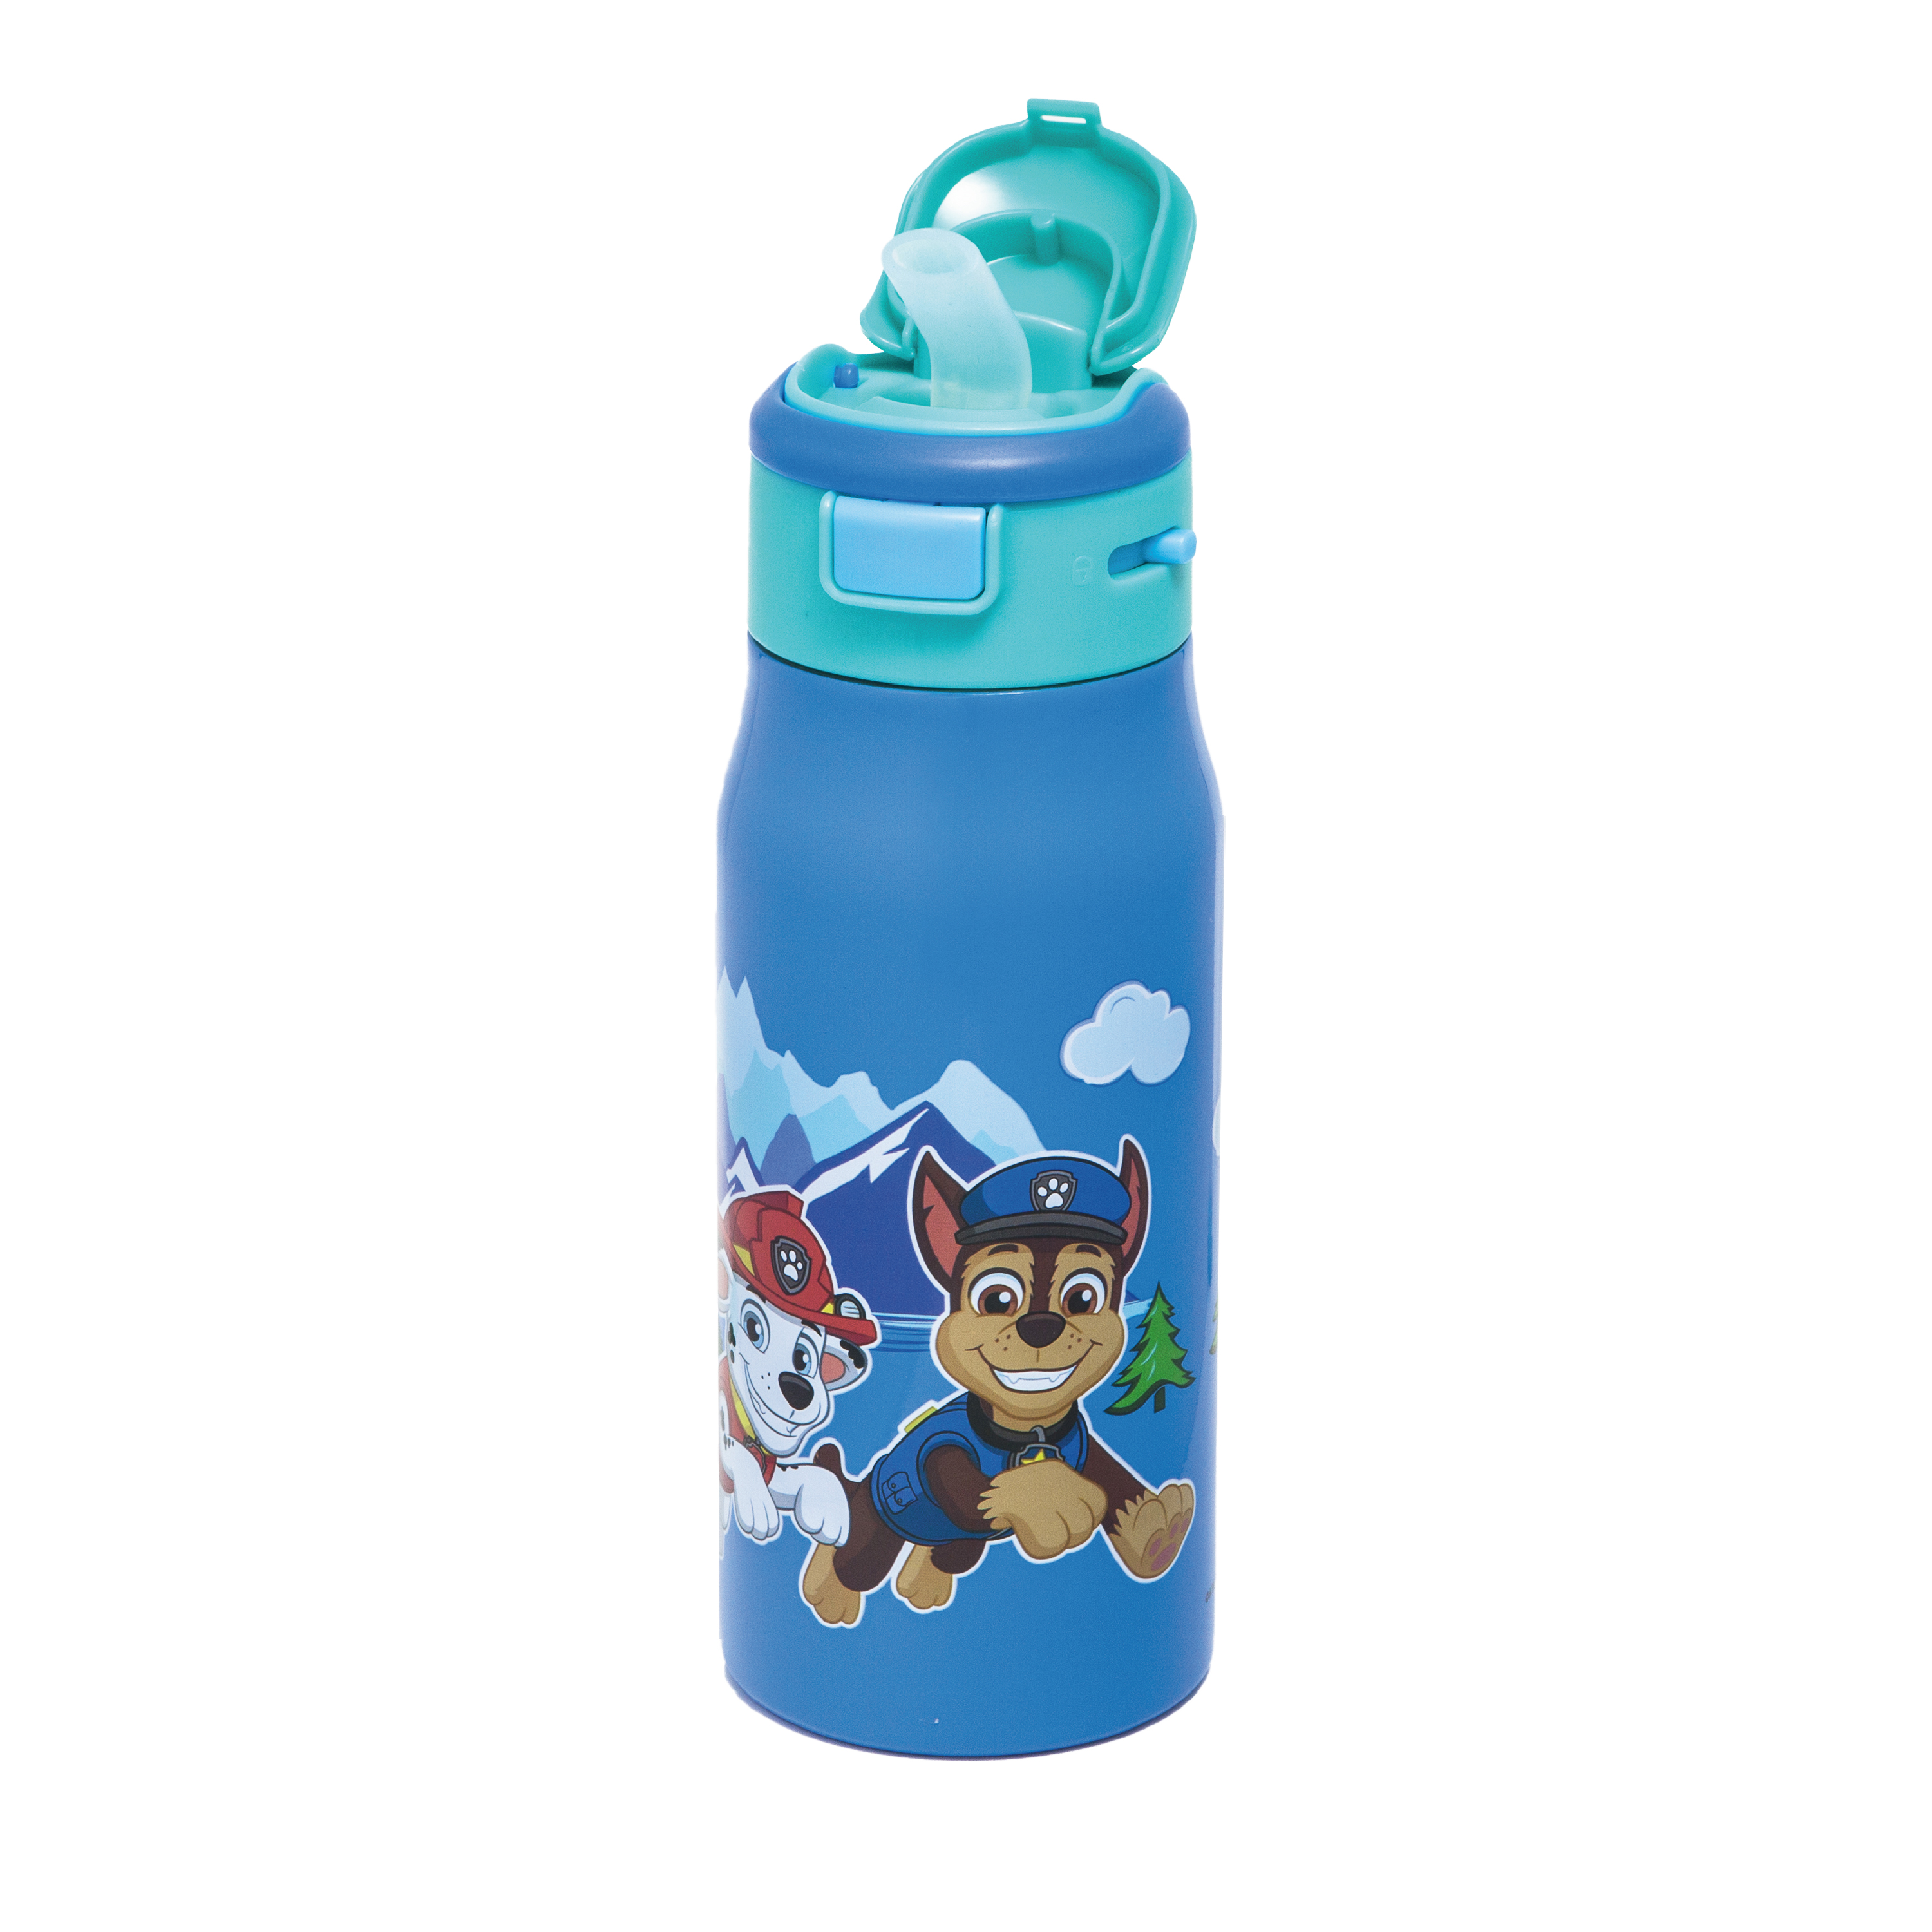 Paw Patrol 13.5 ounce Mesa Double Wall Insulated Stainless Steel Water Bottle, Chase and Marshall slideshow image 3